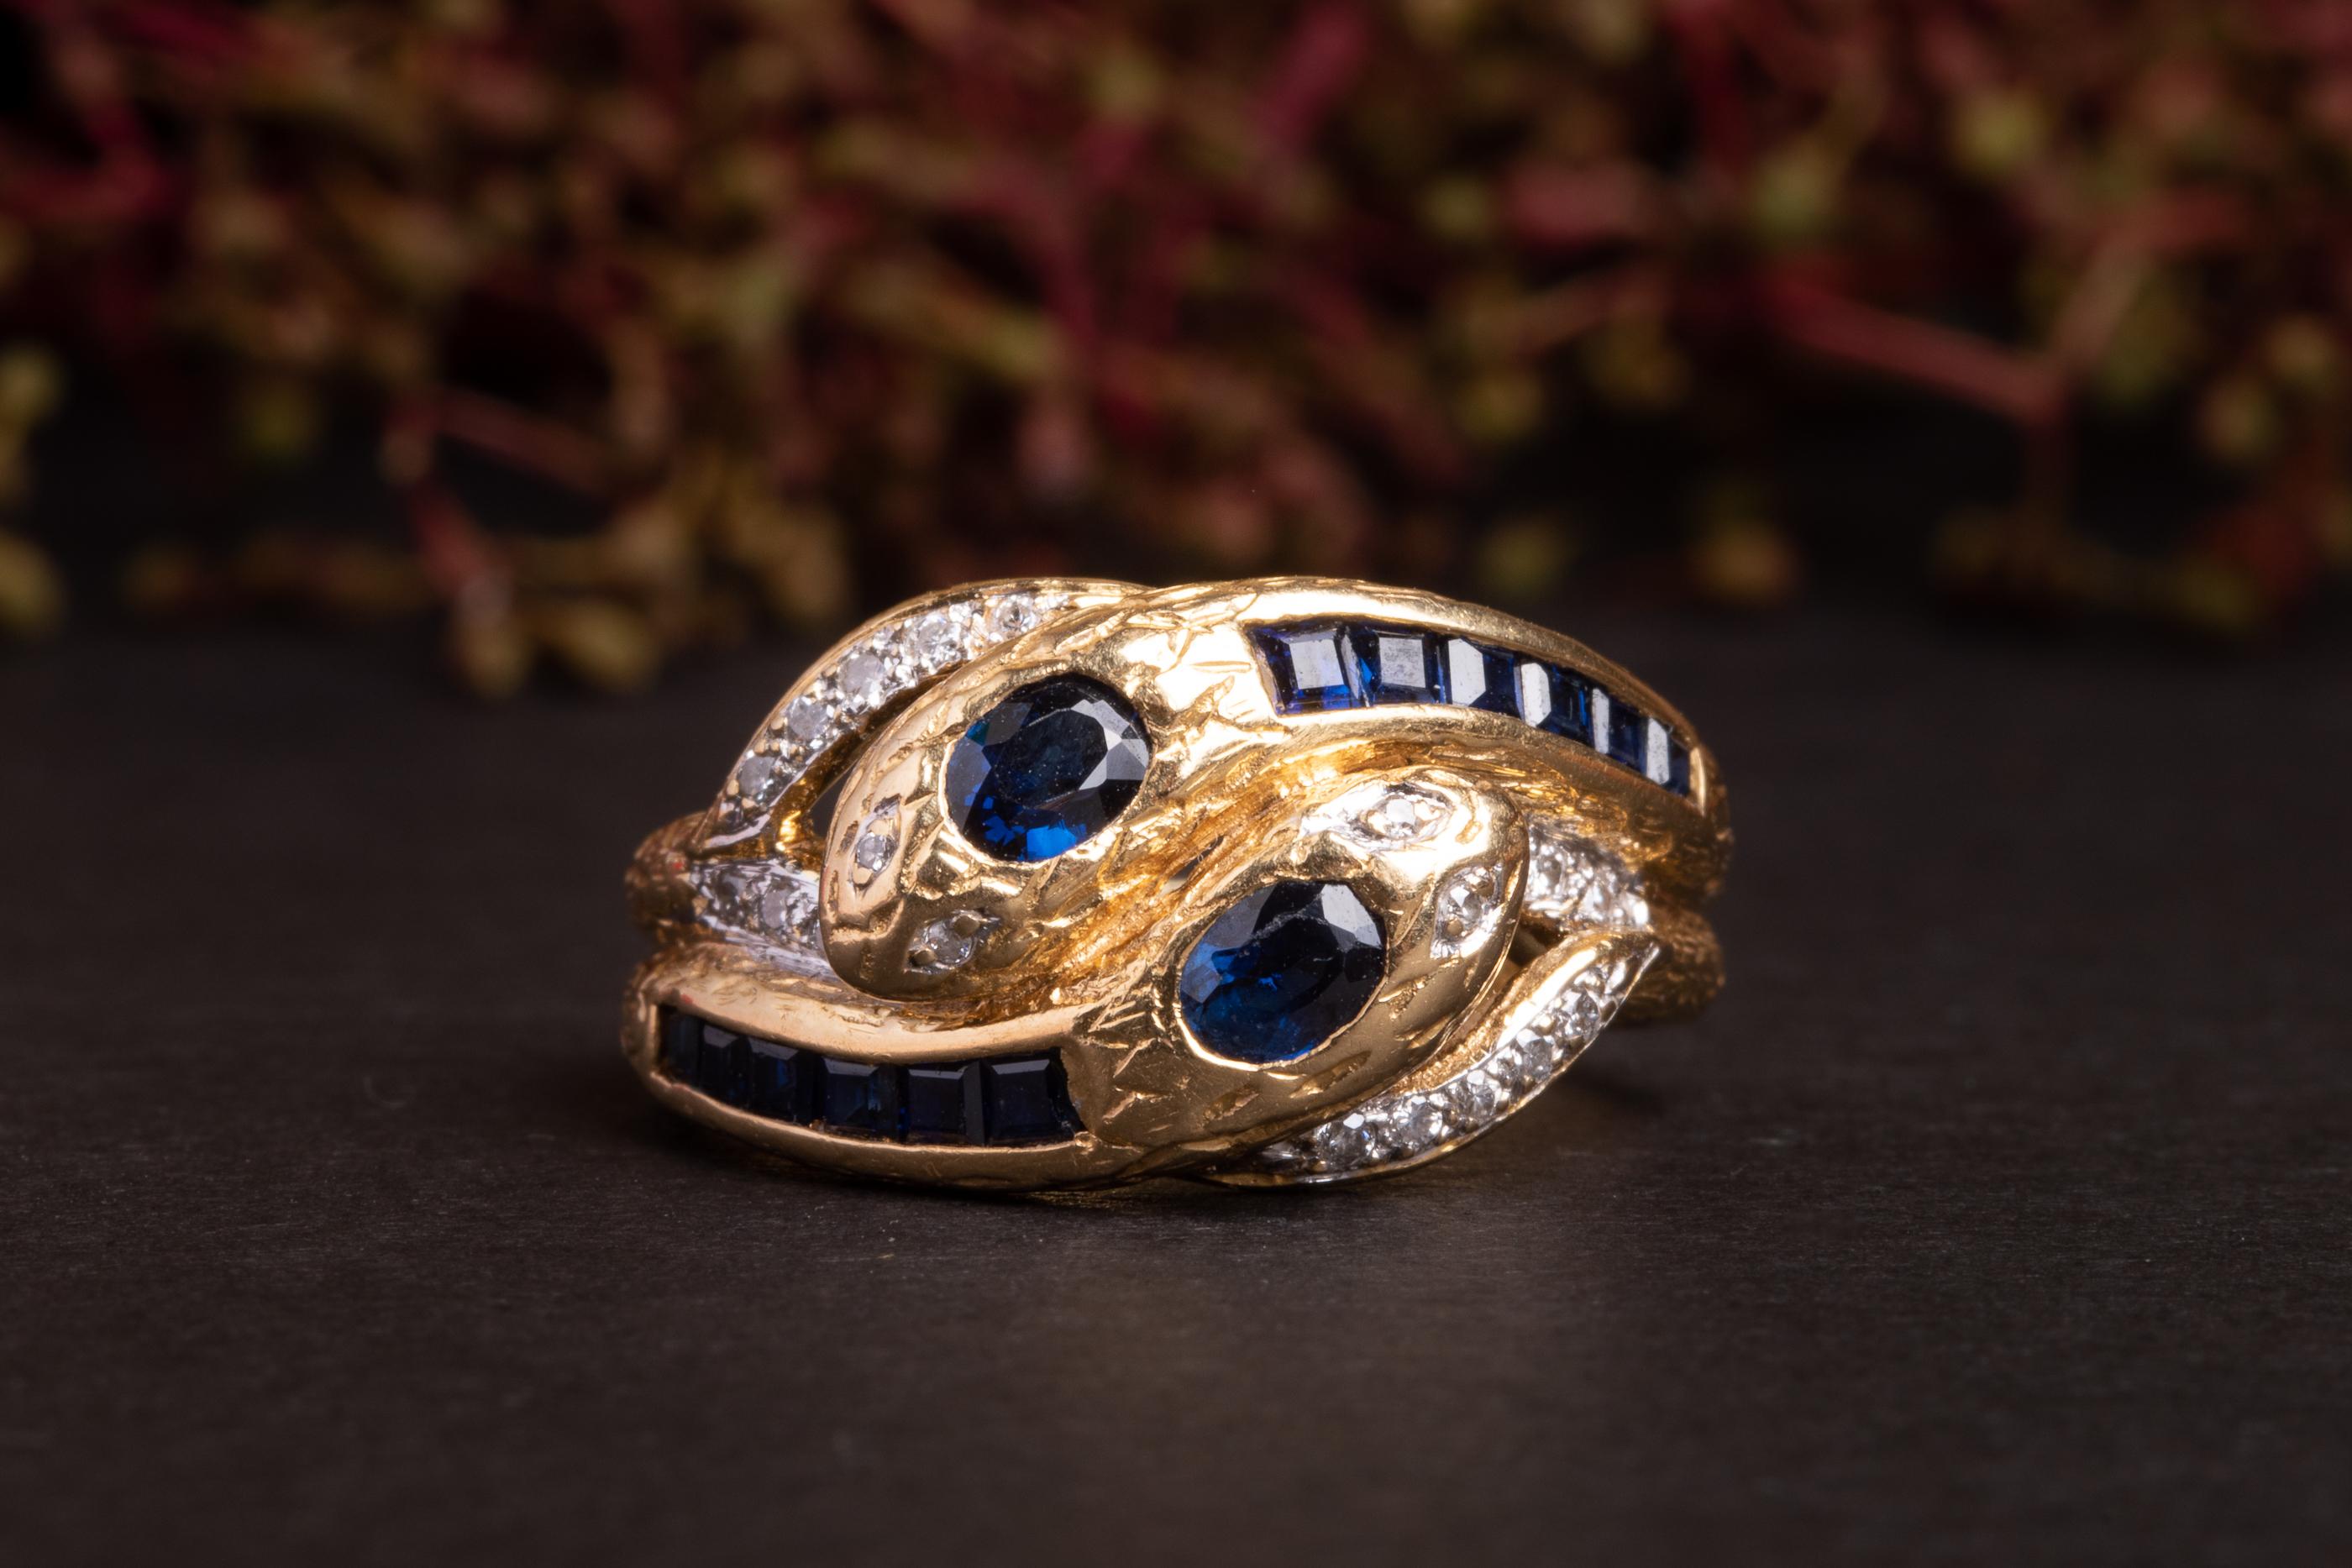 A rather unique gold vintage snake ring. Made of solid 18k yellow gold and set with blue sapphires and diamonds this snake is rather substantial and weights almost 5 g!

The body of the snake is very detailed with gold coils and diamonds accenting